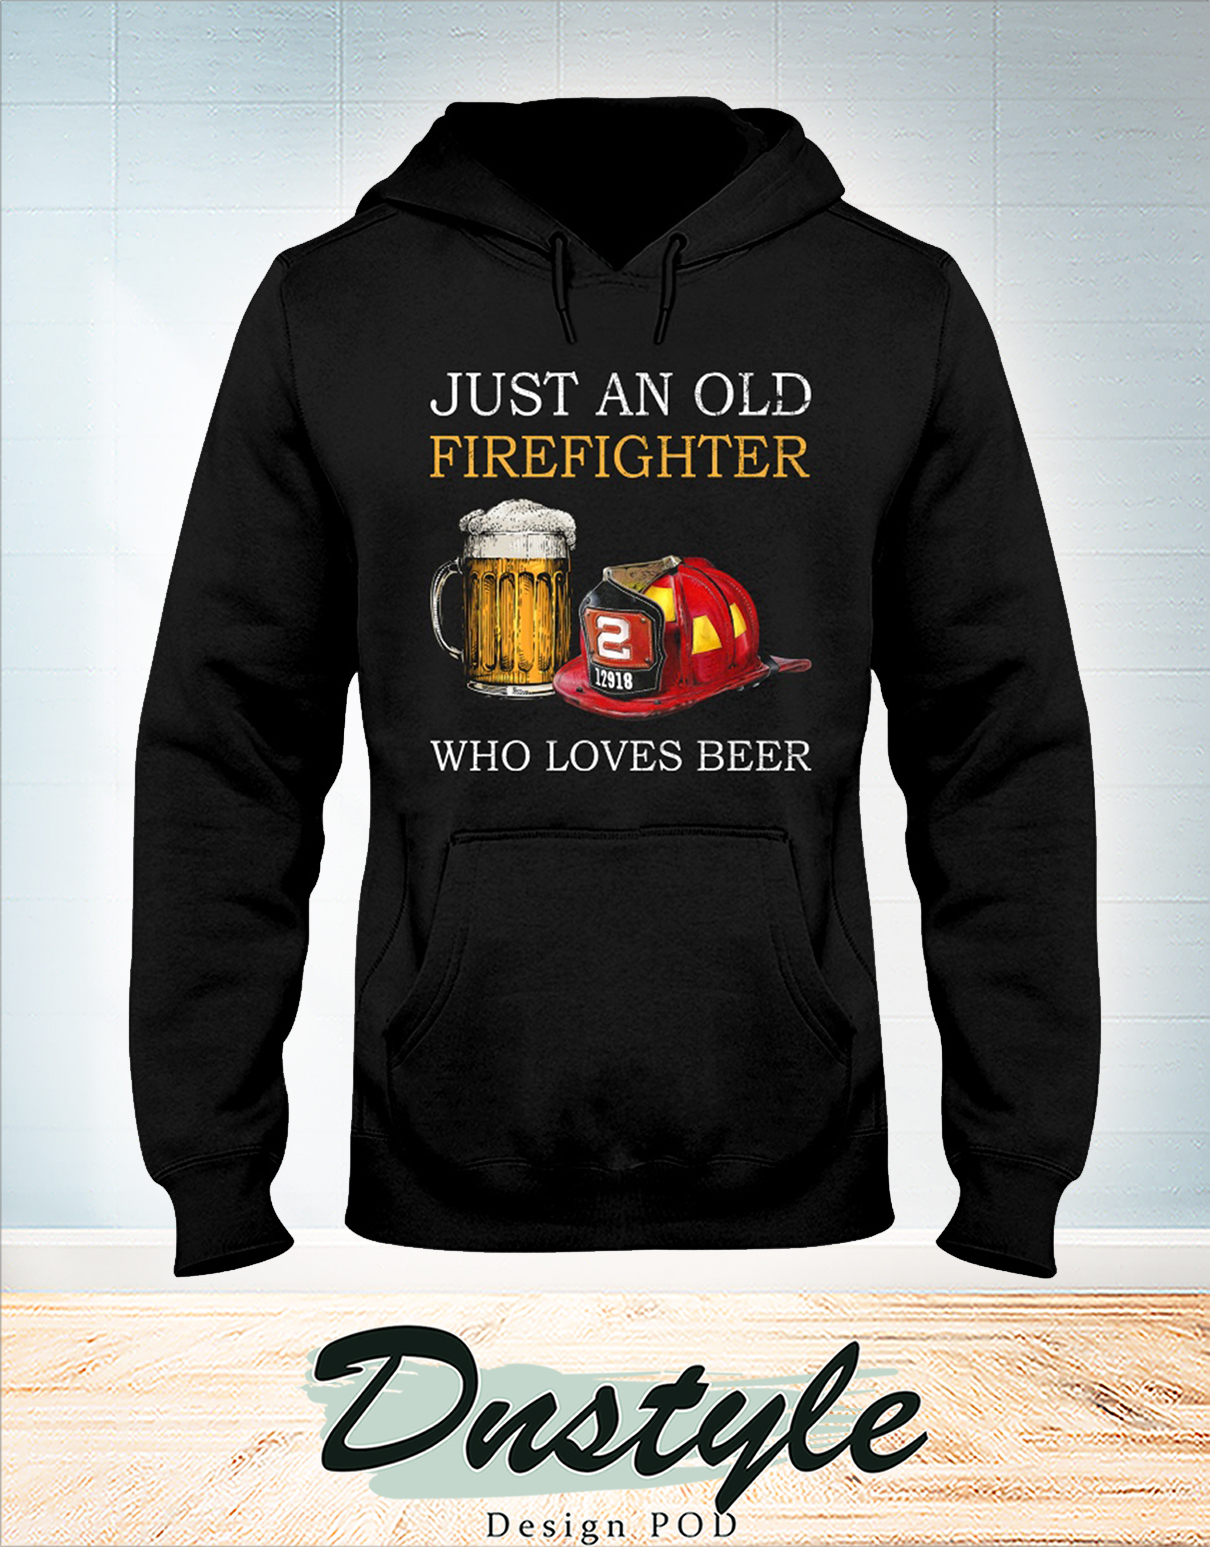 Just an old firefighter who loves beer hoodie